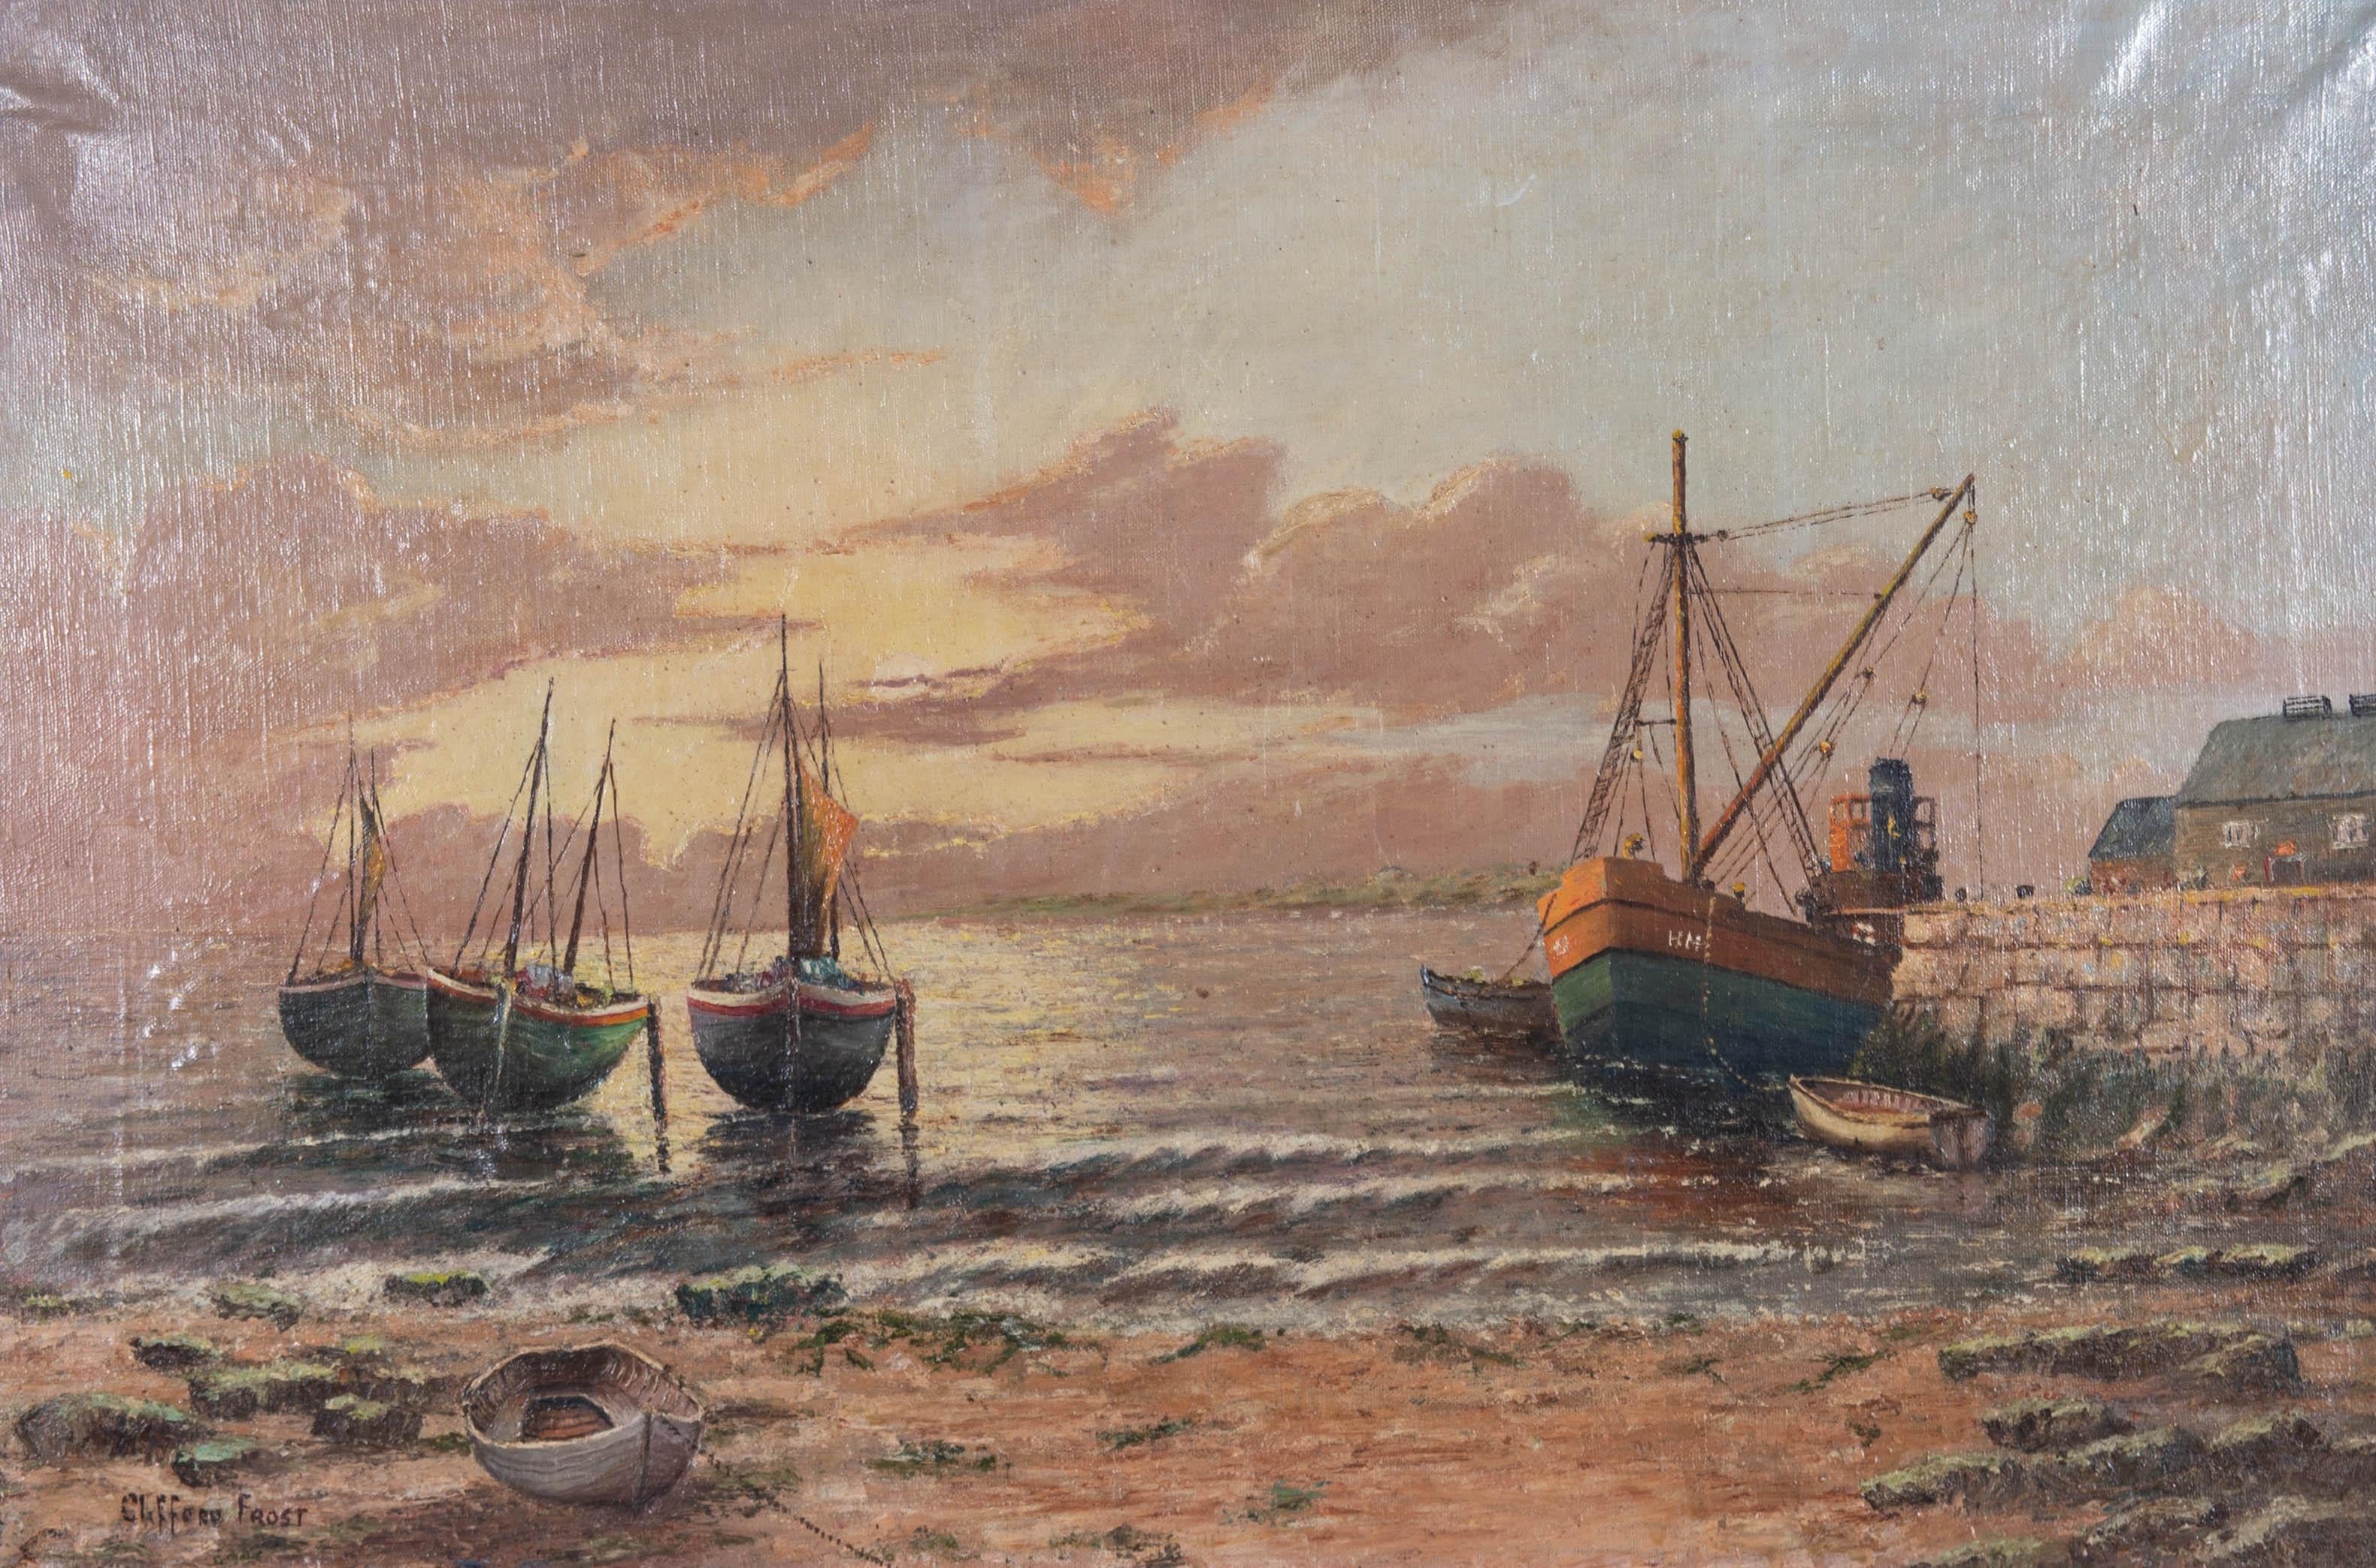 A pleasant seascape in oil by Clifford Frost, depicting a sunset beach scene with boats. Signed to the lower left-hand corner. The artist name and title are inscribed on the reverse. Presented in a white wooden frame, as shown. On canvas on